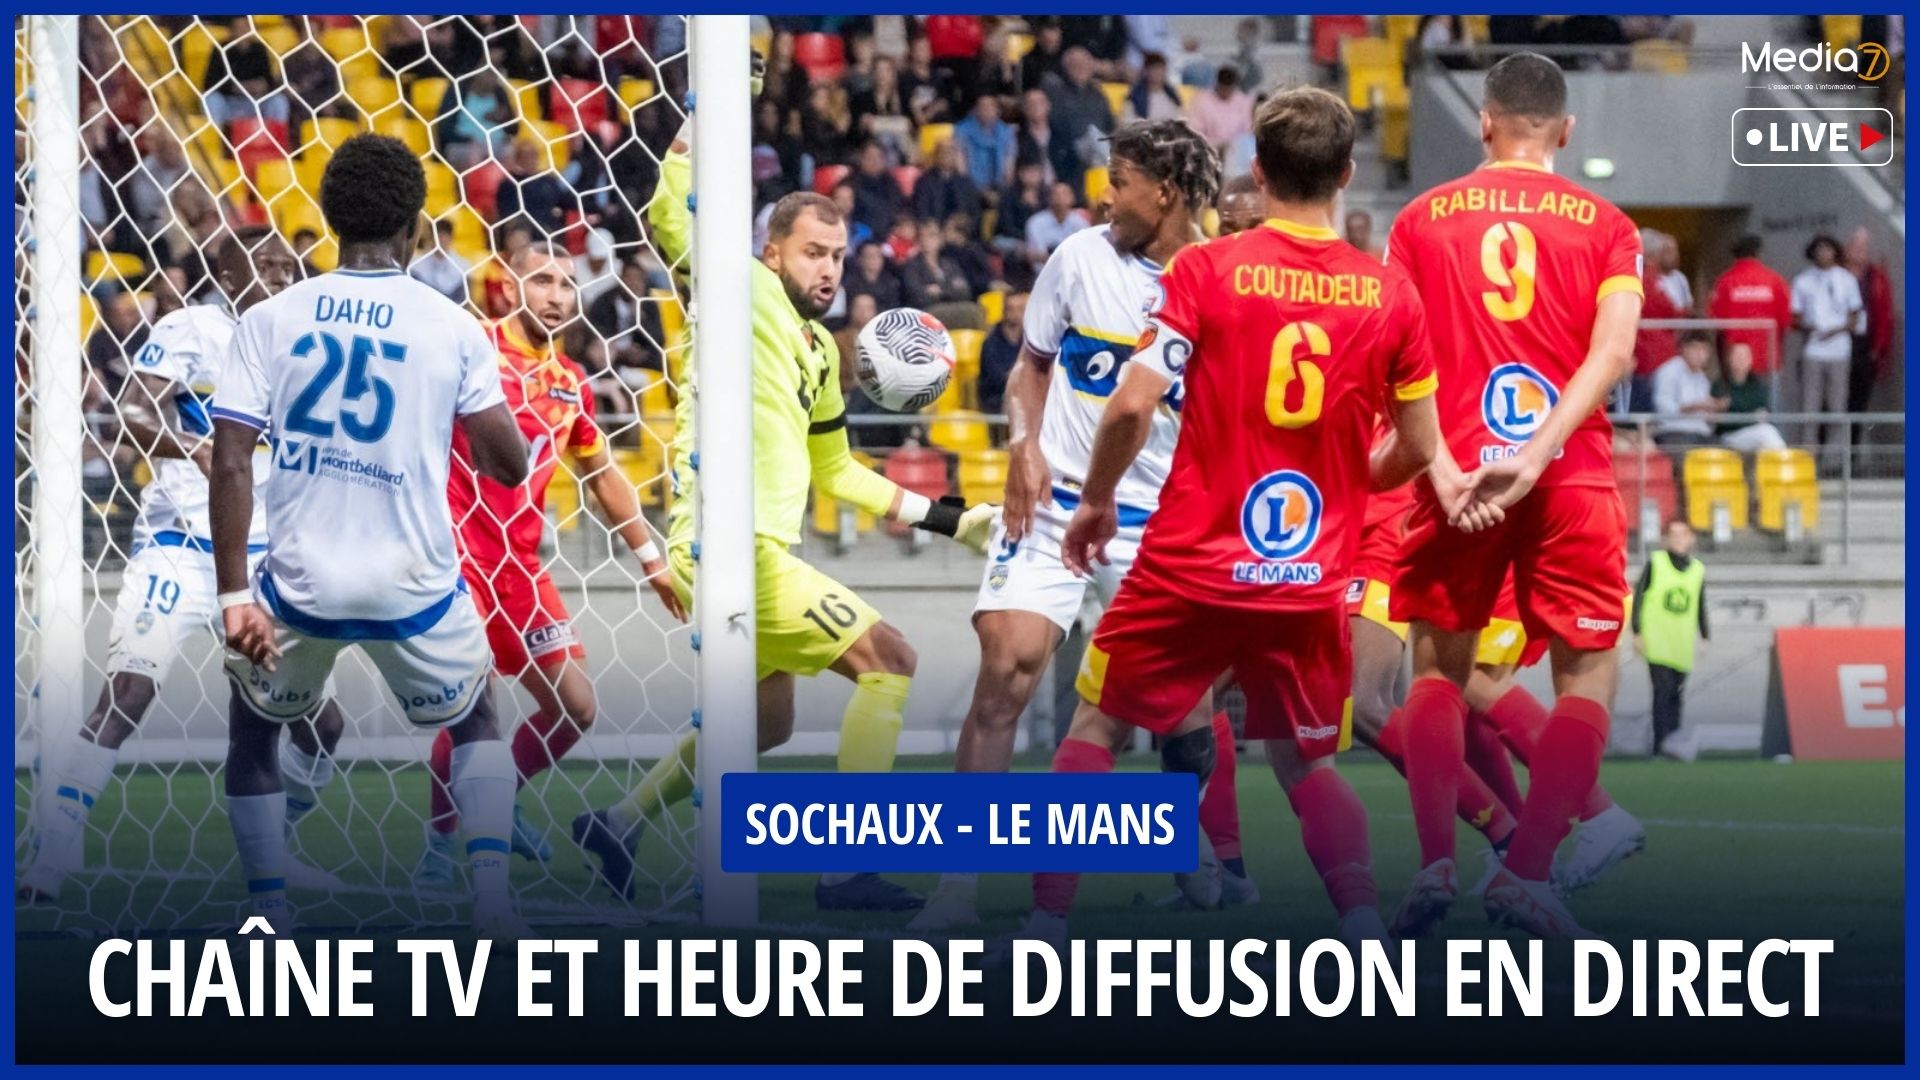 Match Sochaux - Le Mans Live: TV Channel and Broadcast Time - Media7